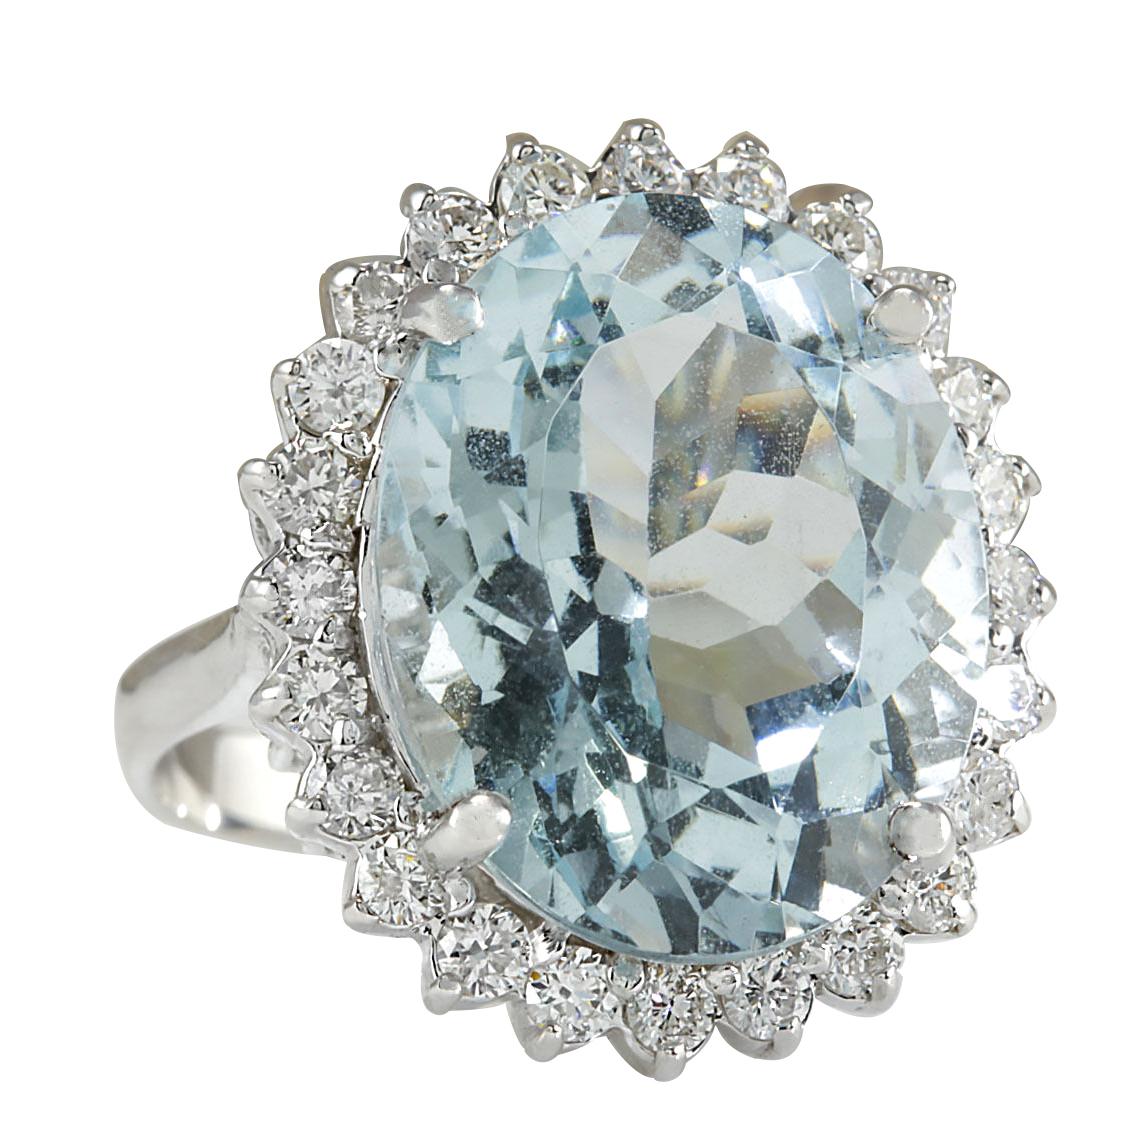 Stamped: 14K White Gold
Total Ring Weight: 7.5 Grams
Total Natural Aquamarine Weight is 12.42 Carat (Measures: 18.00x13.00 mm)
Color: Blue
Total Natural Diamond Weight is 1.00 Carat
Color: F-G, Clarity: VS2-SI1
Face Measures: 22.10x18.90 mm
Sku: